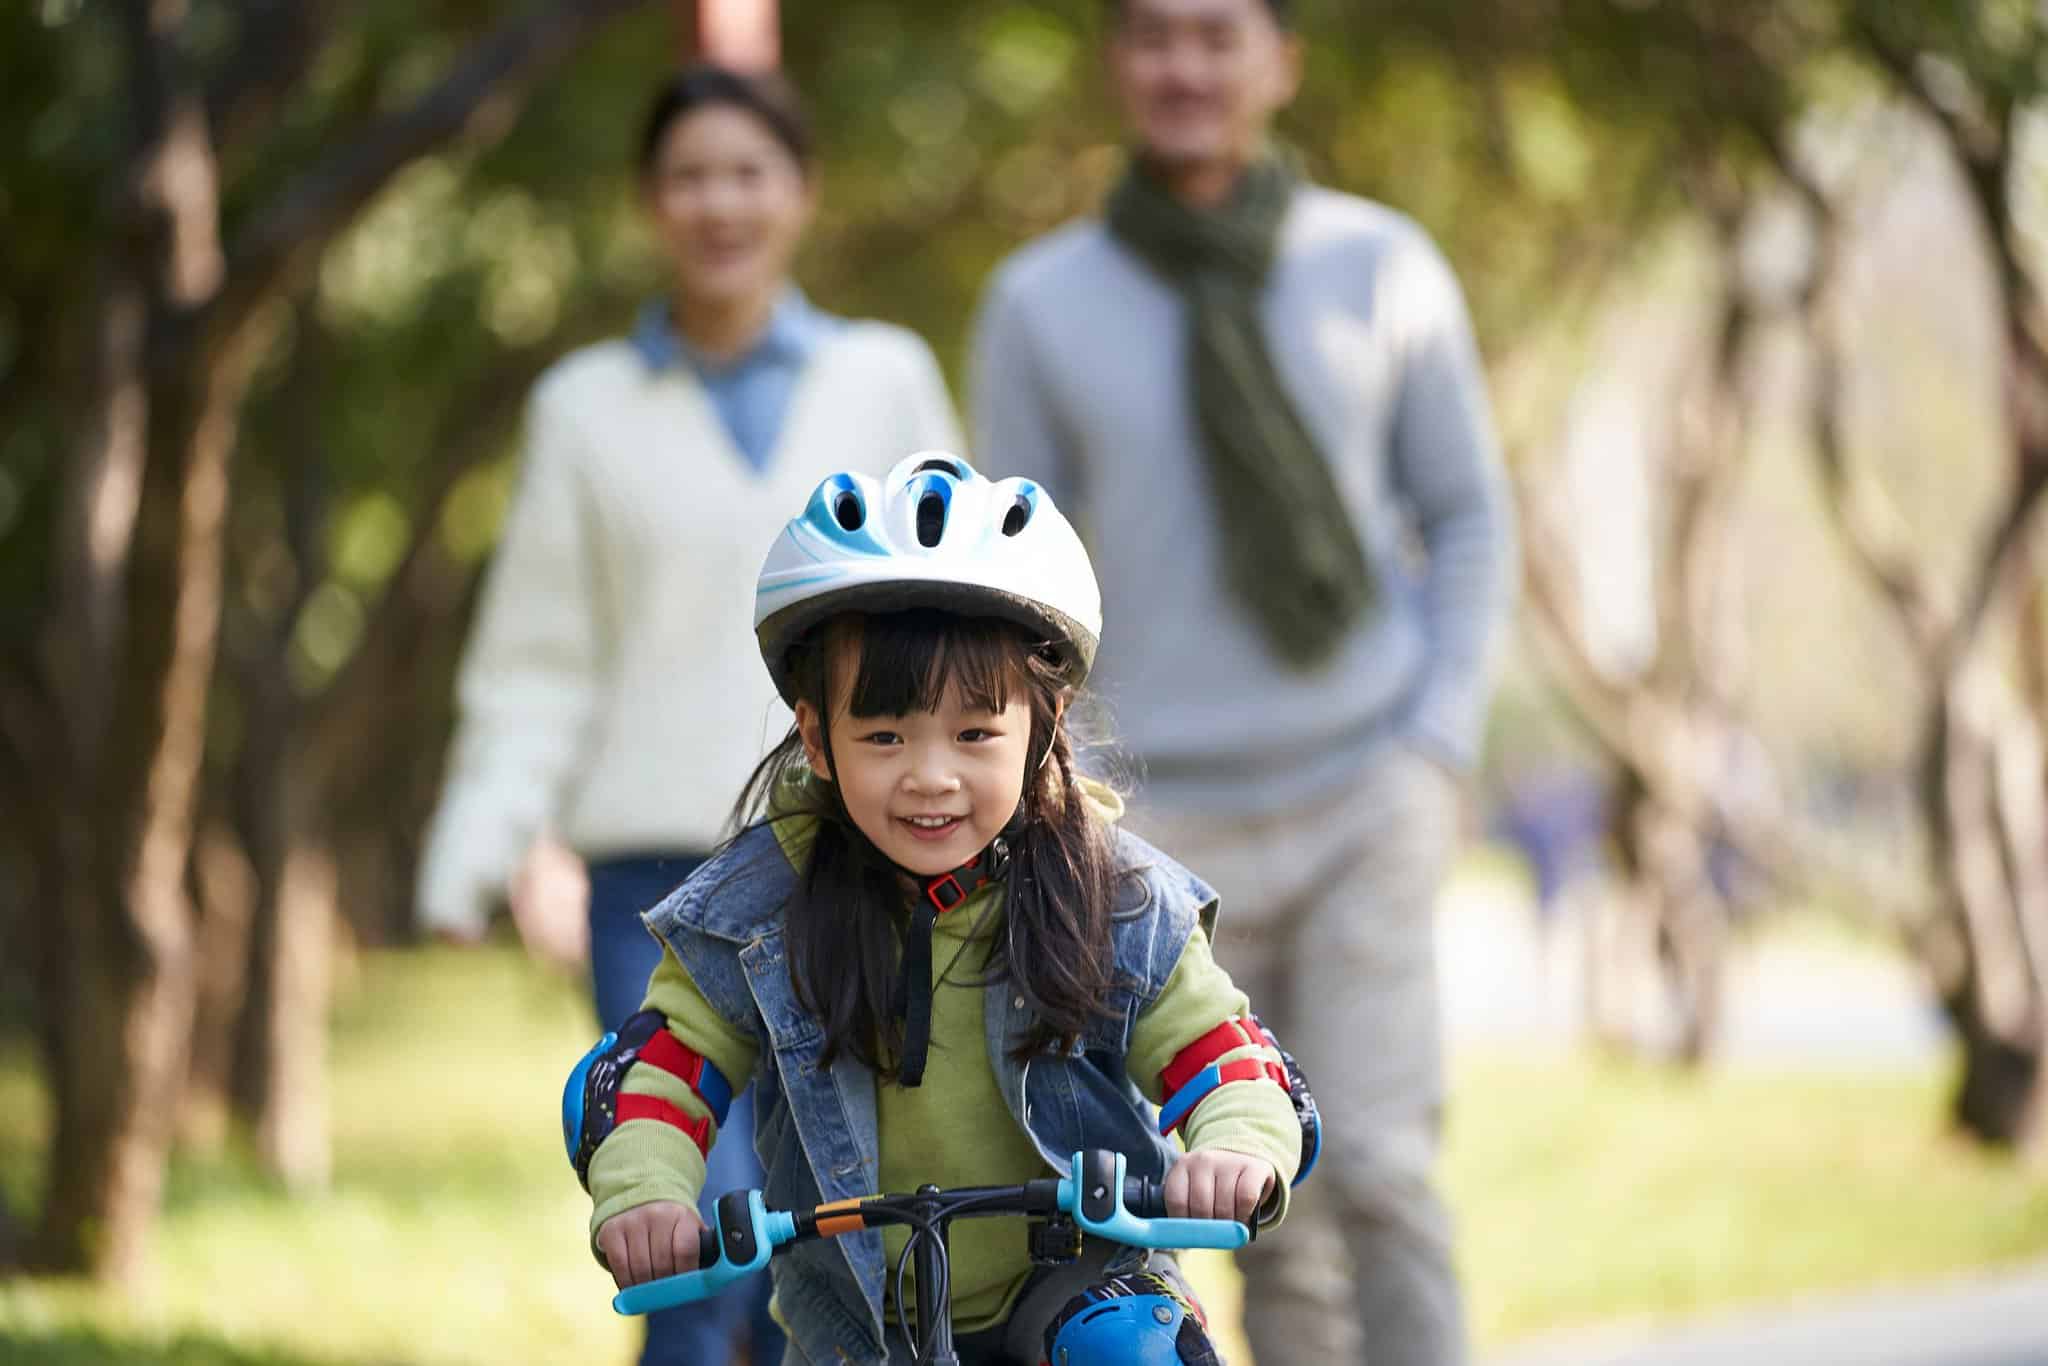 child riding a bicycle in a park with parents behind them